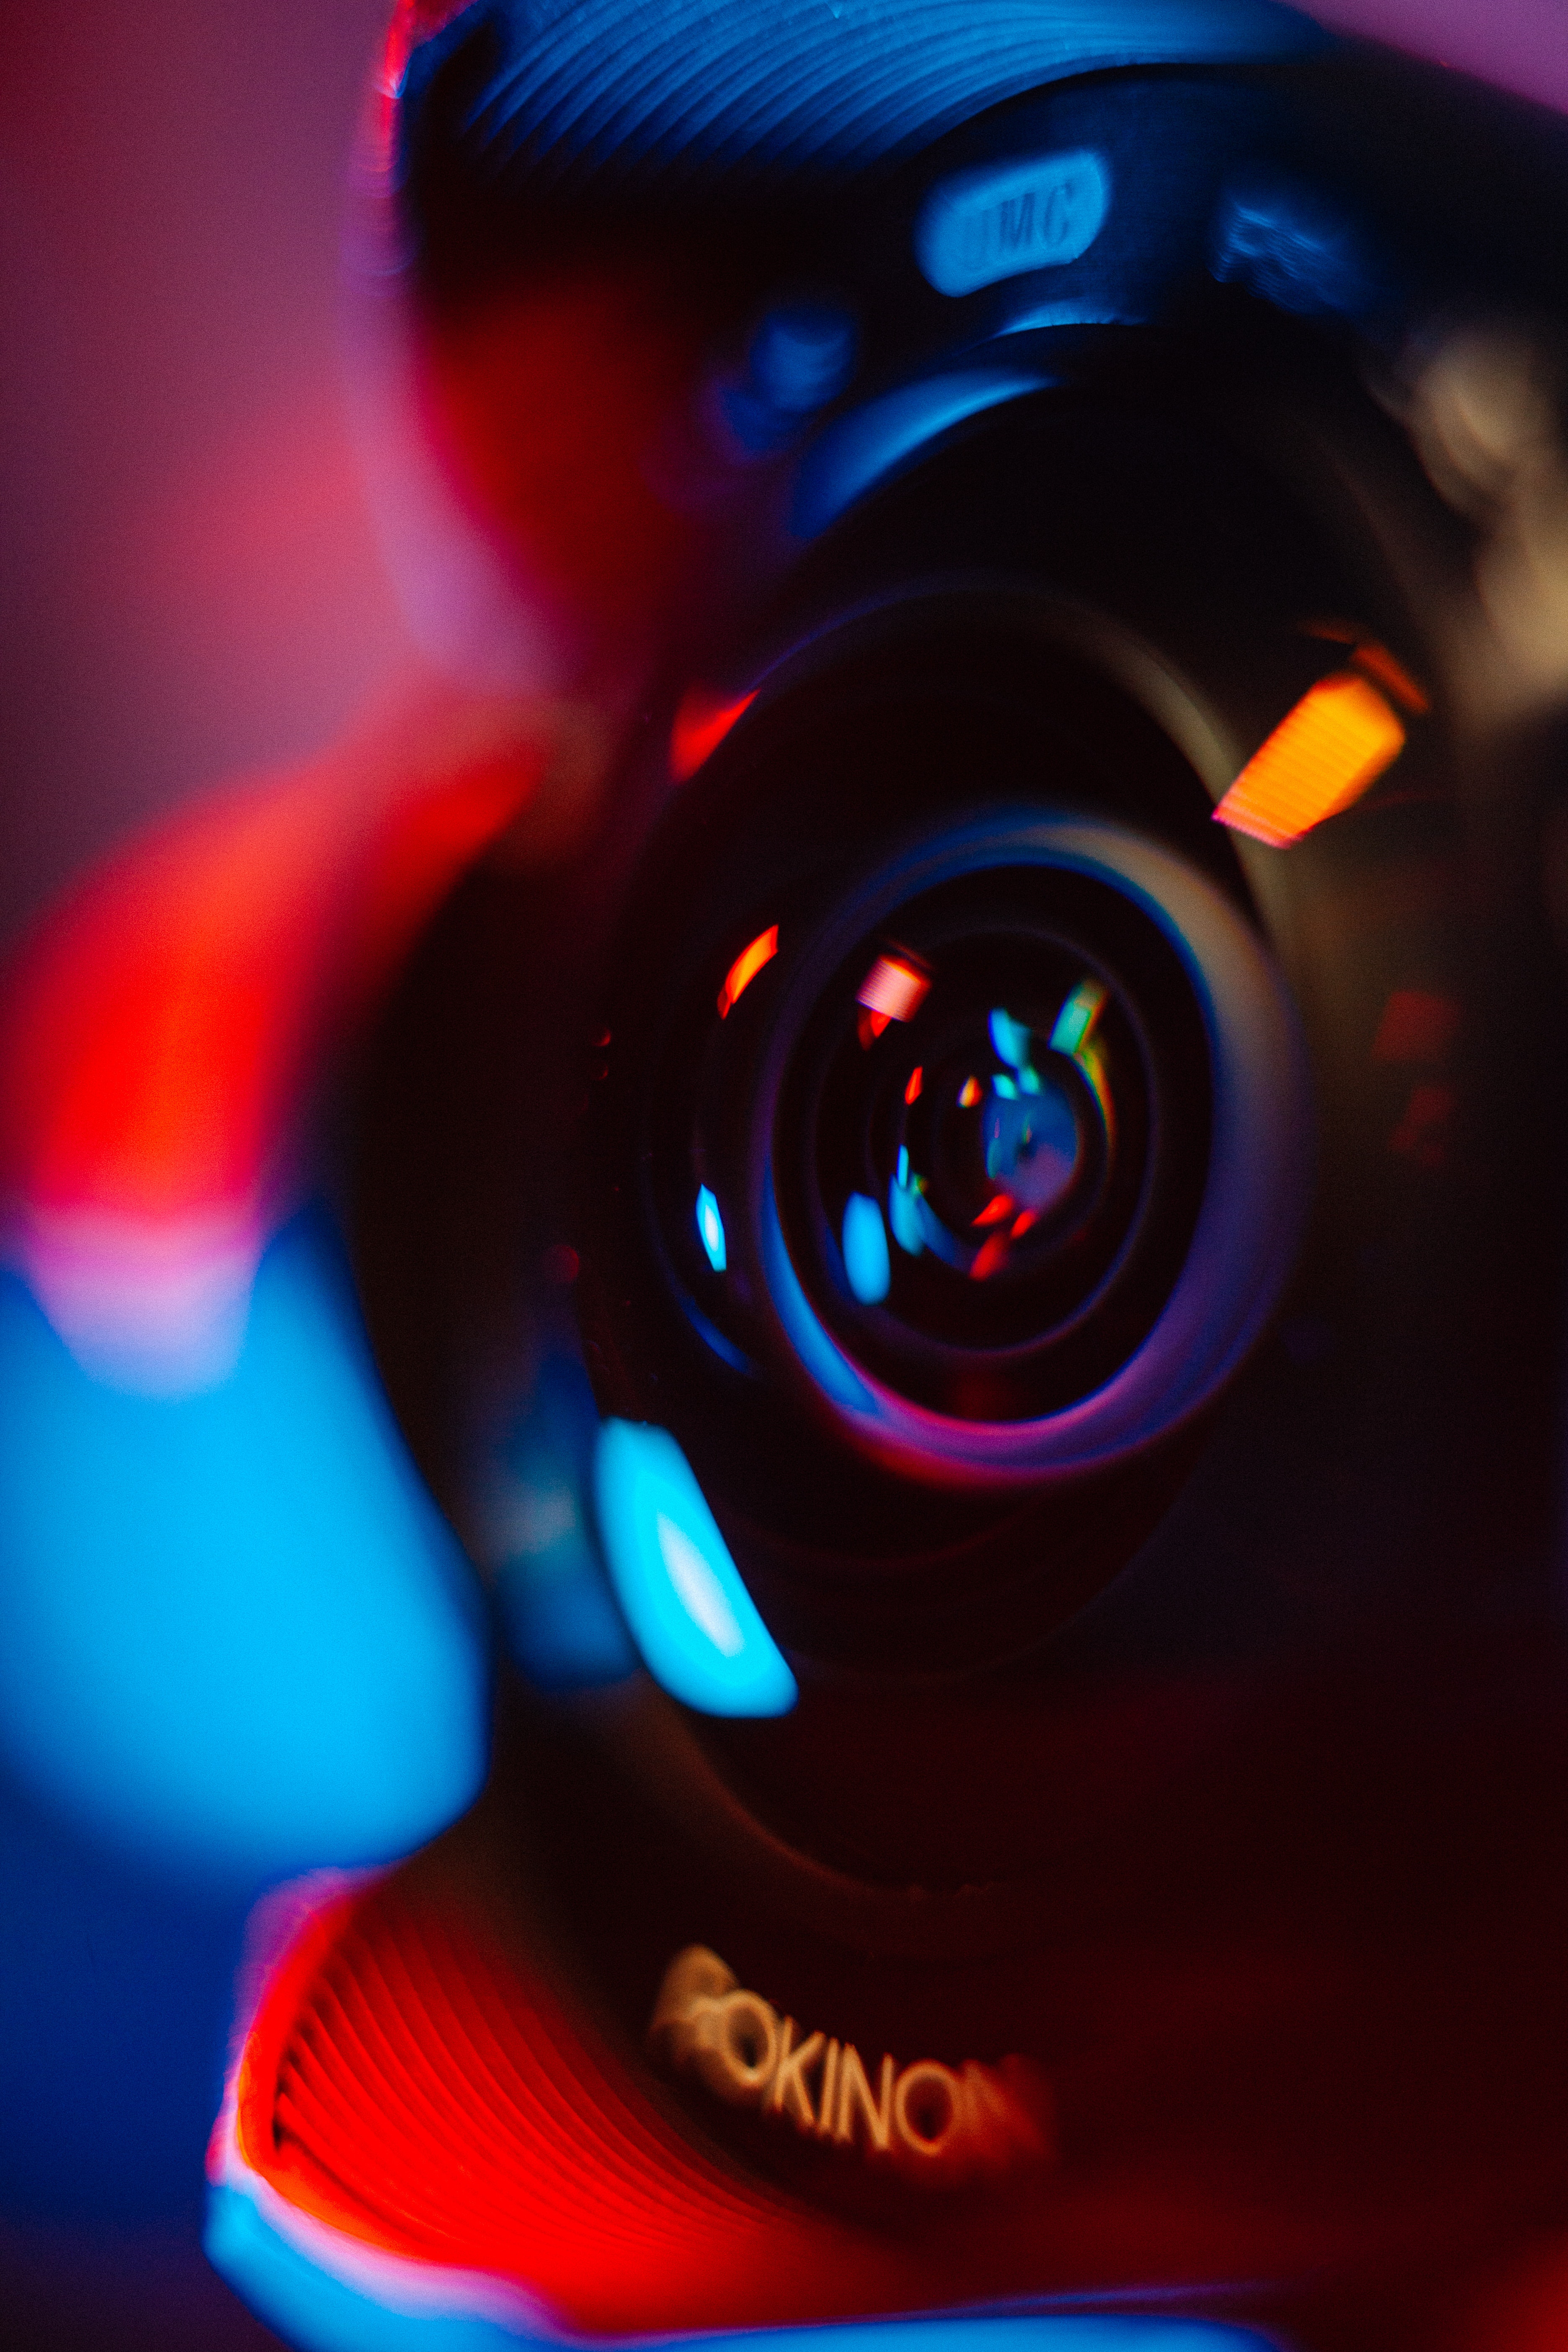 lens, technology, technologies, blur, glare, multicolored, motley, smooth, camera